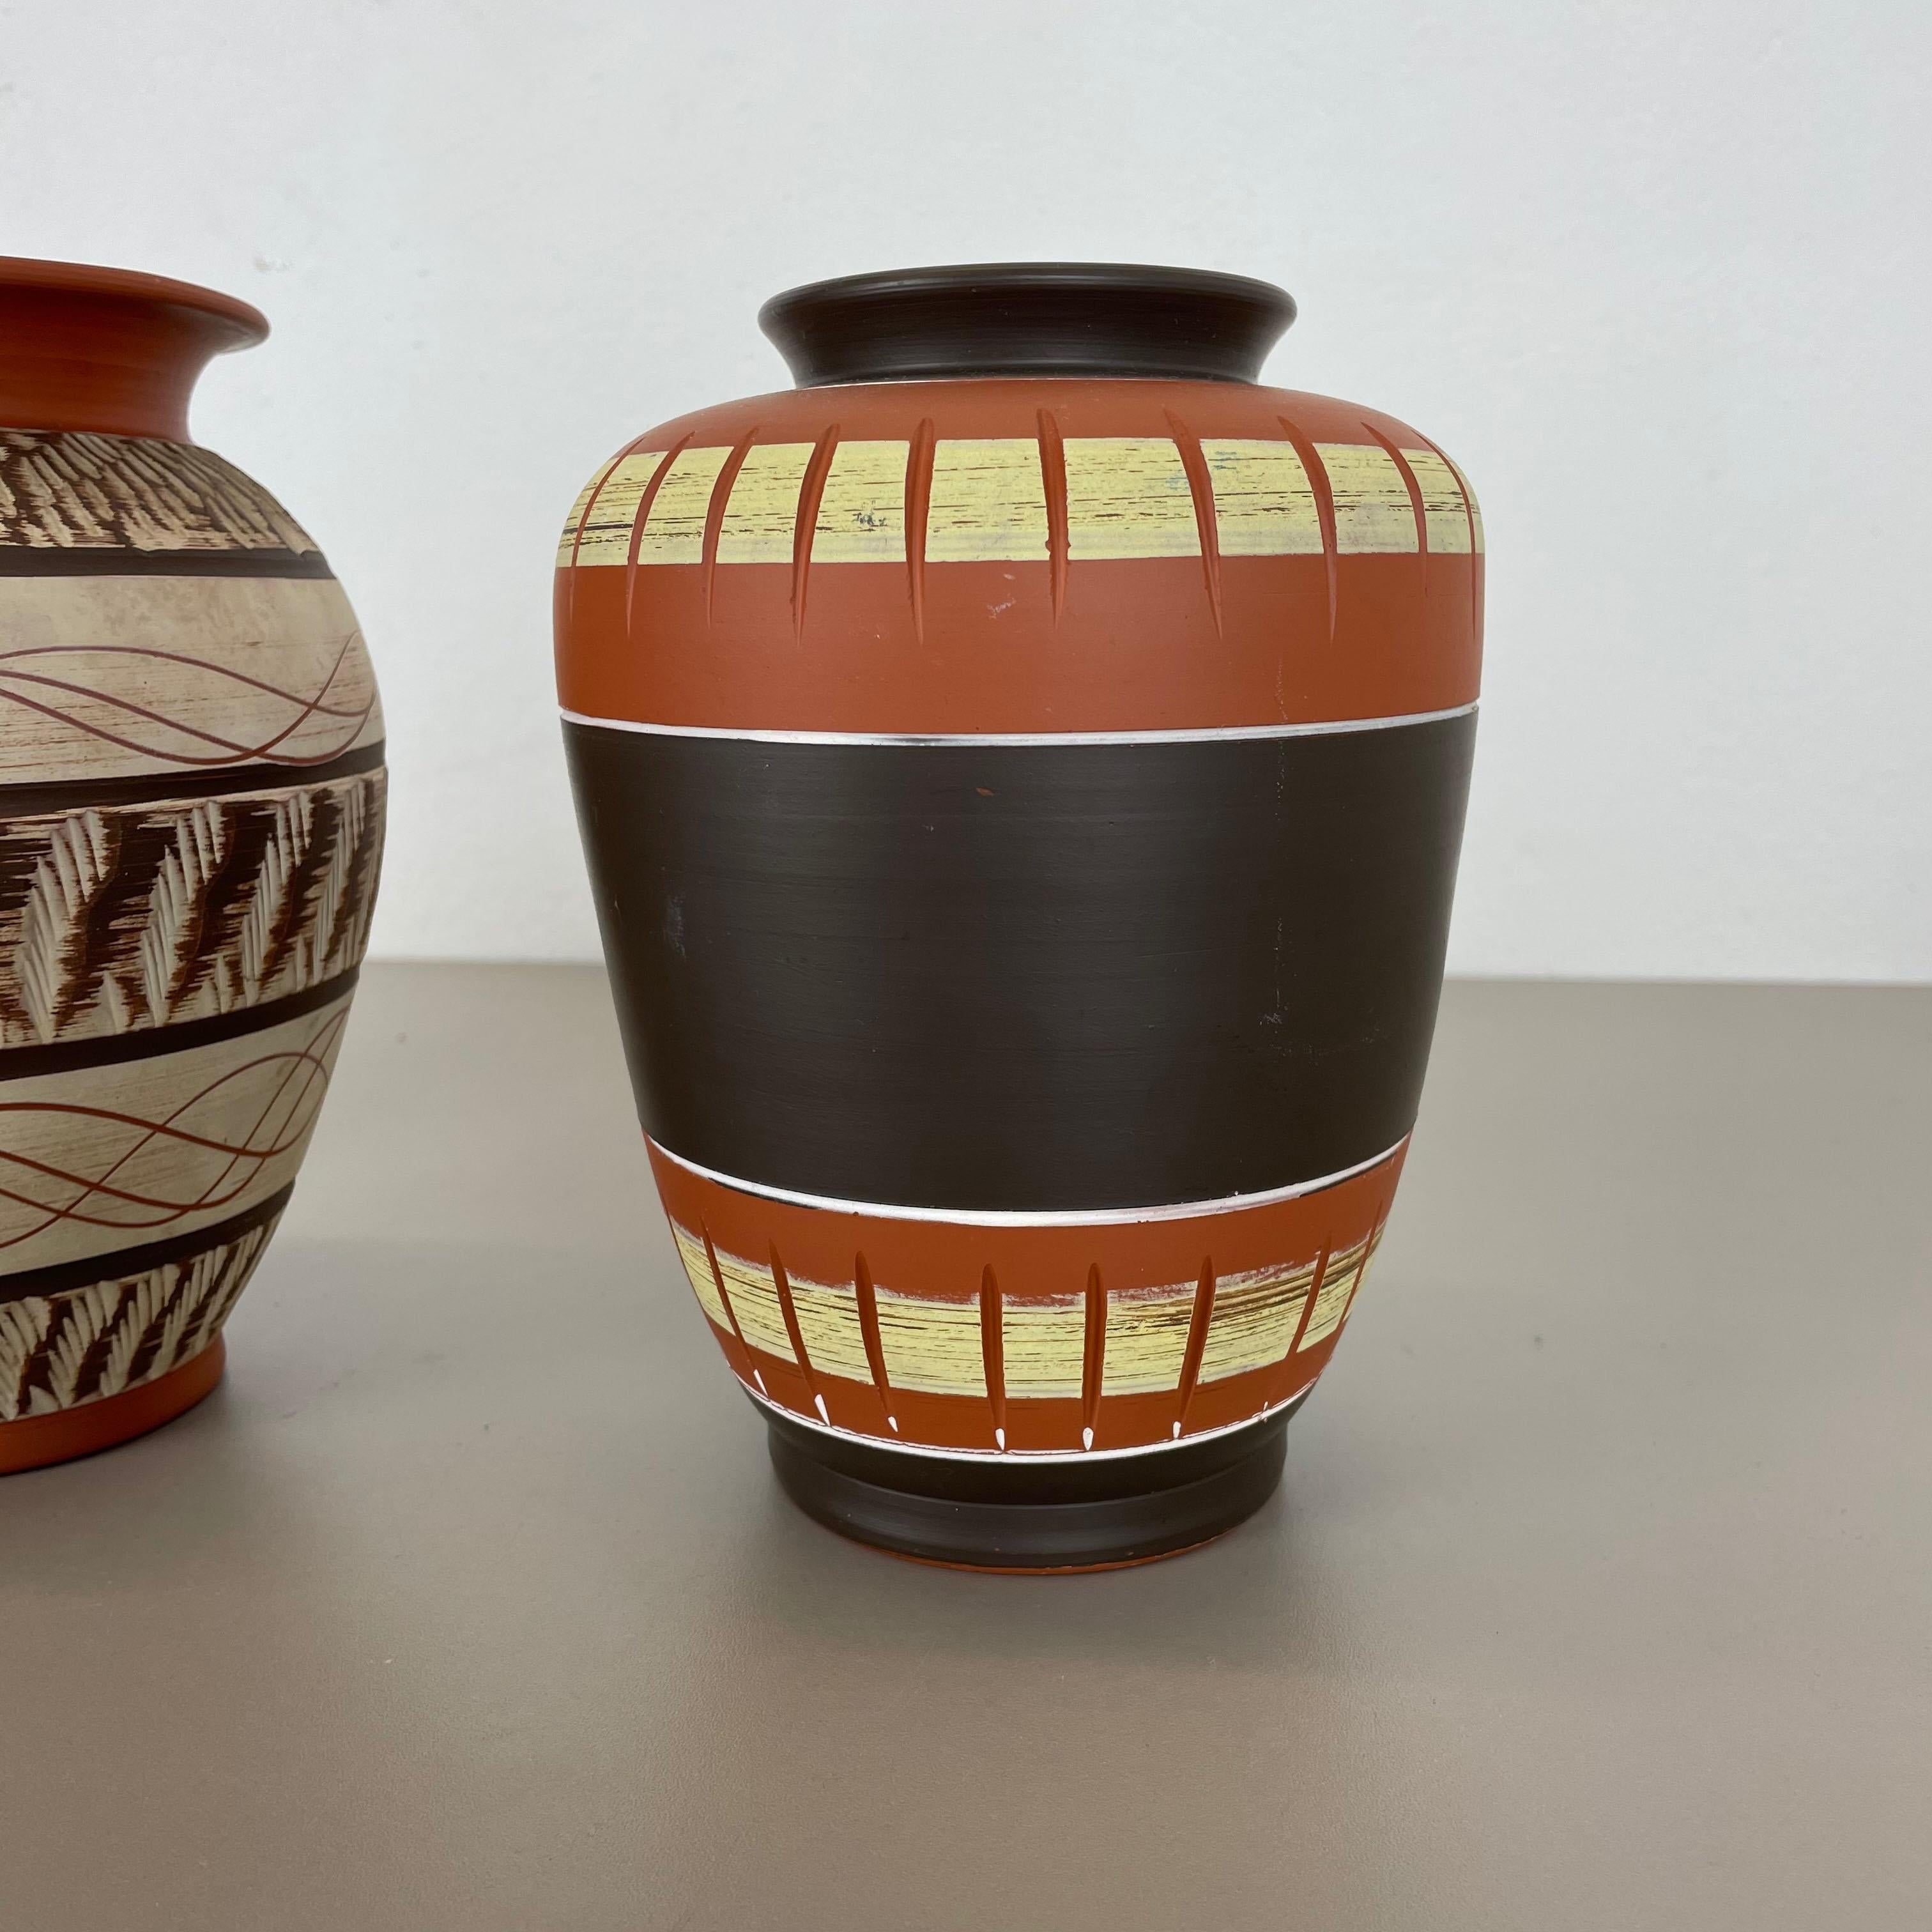 20th Century Set of 3 Abstract Ceramic Pottery Vases by EIWA / AKRU Ceramics, Germany, 1950s For Sale